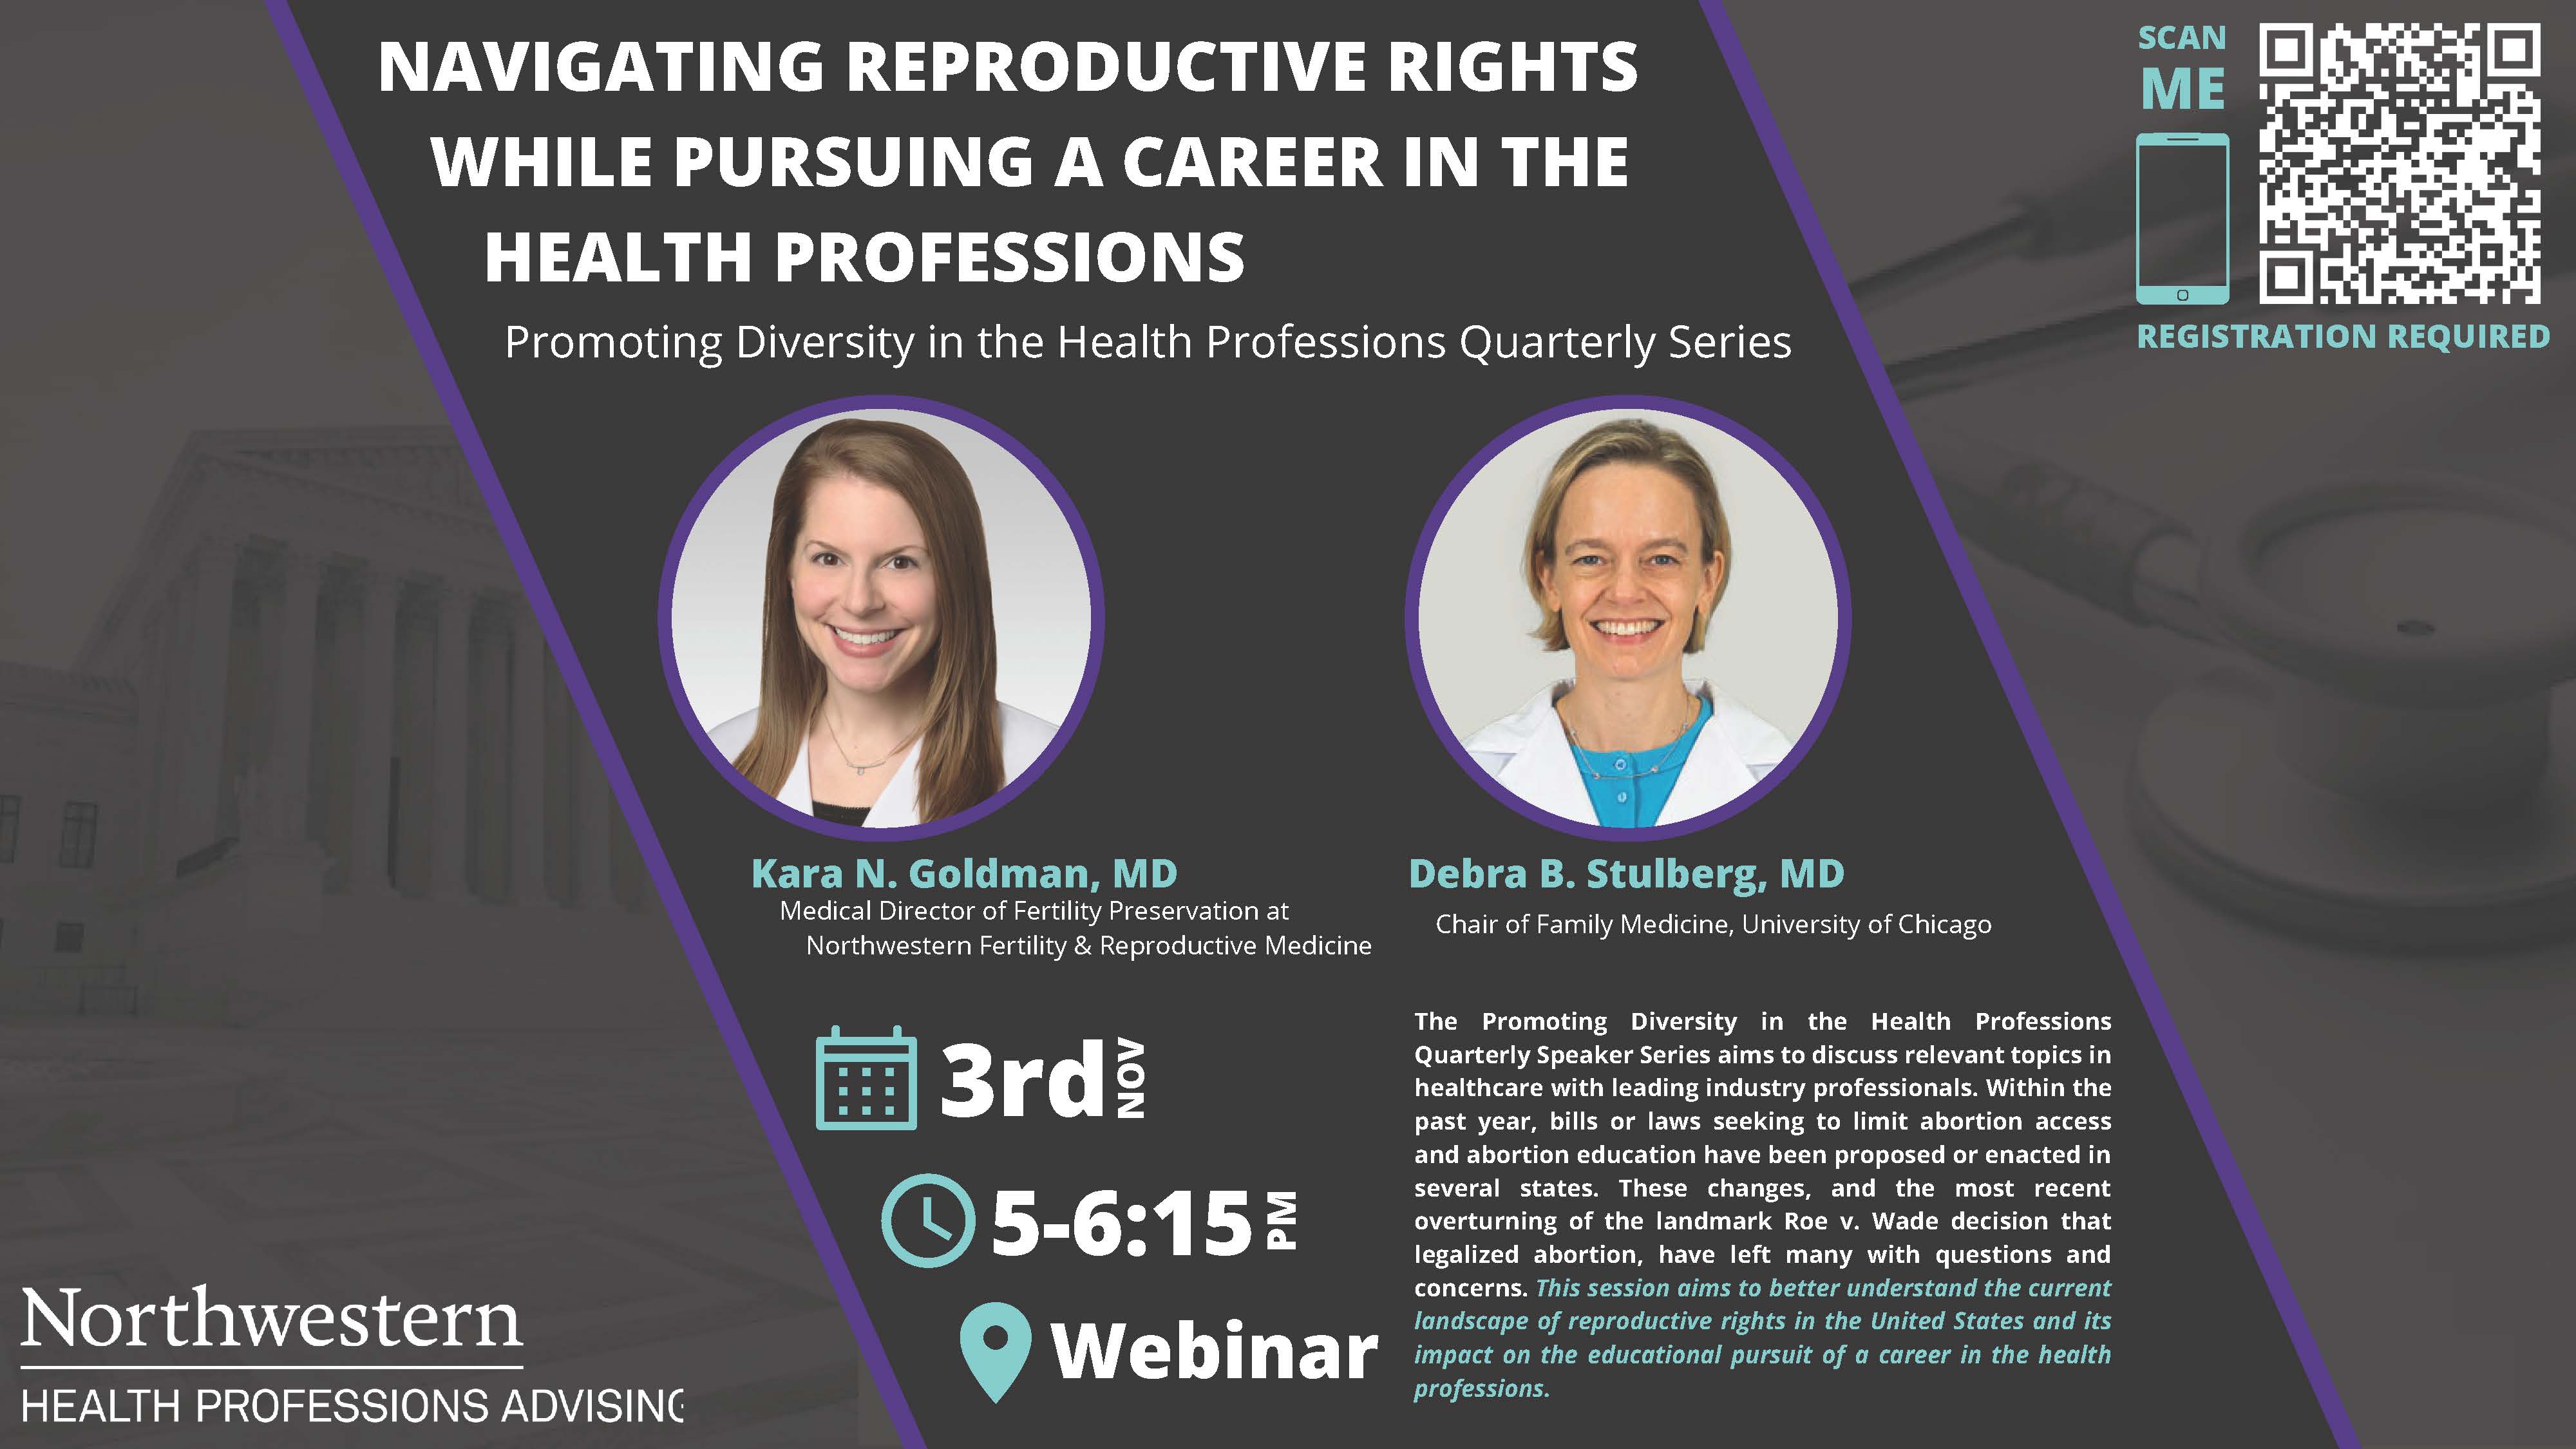 Navigating Reproductive Rights While Pursuing a Career in the Health Professions